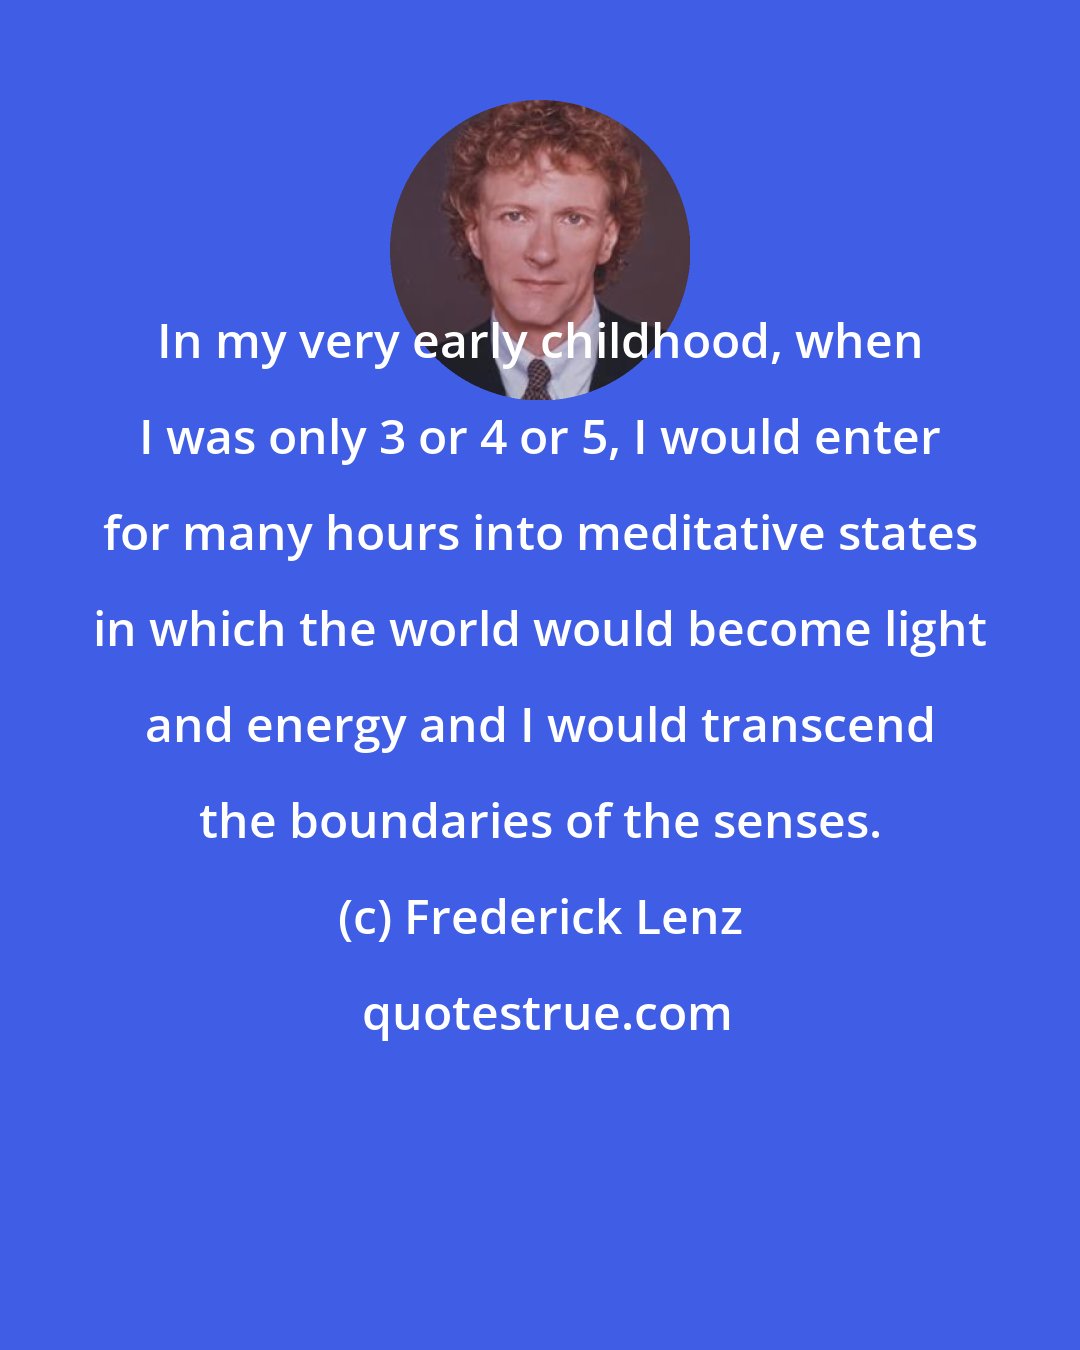 Frederick Lenz: In my very early childhood, when I was only 3 or 4 or 5, I would enter for many hours into meditative states in which the world would become light and energy and I would transcend the boundaries of the senses.